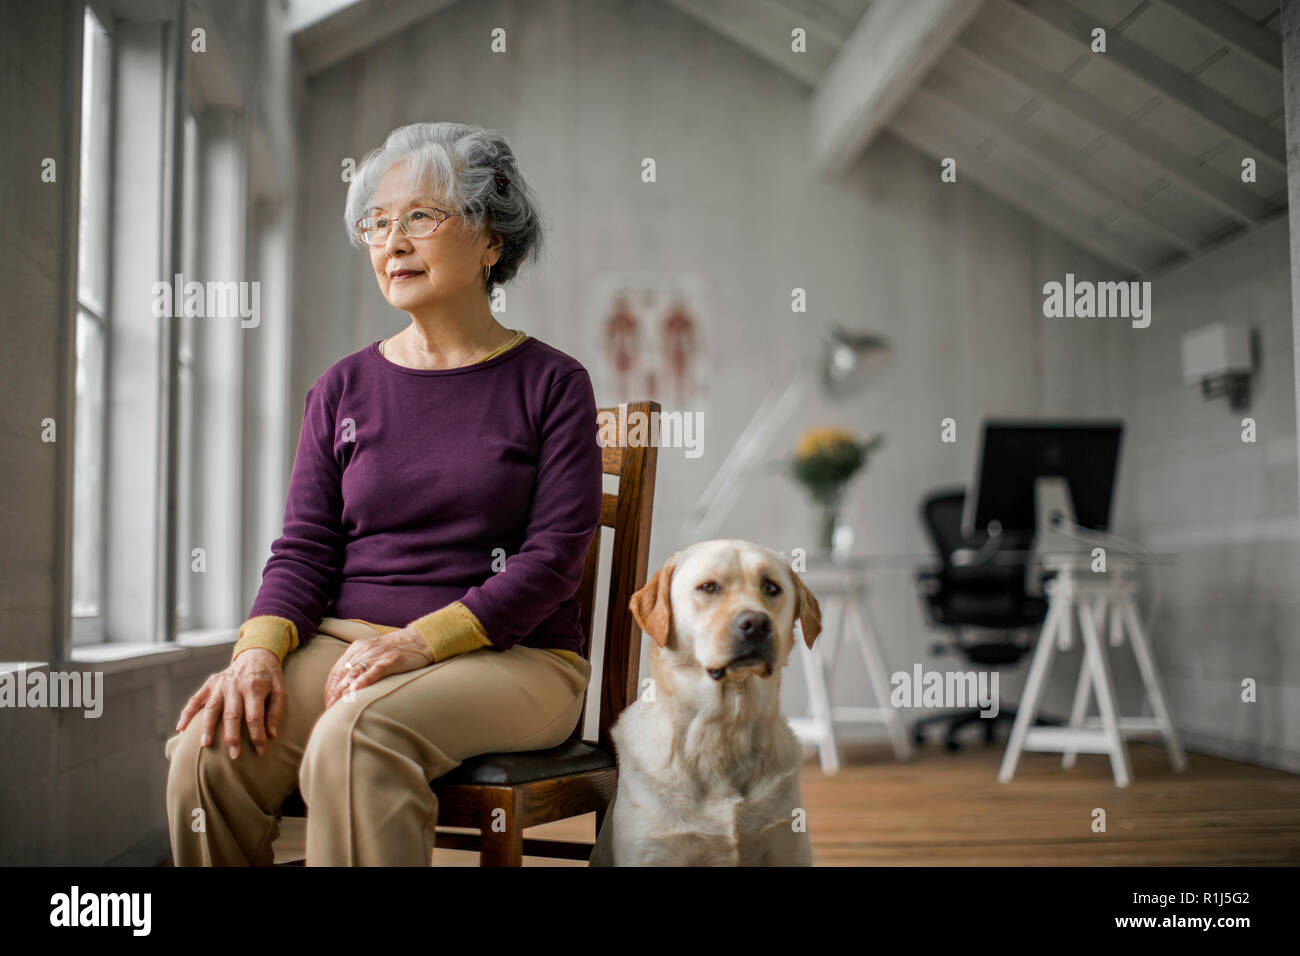 Senior woman sitting pensively with her dog by her side. Stock Photo